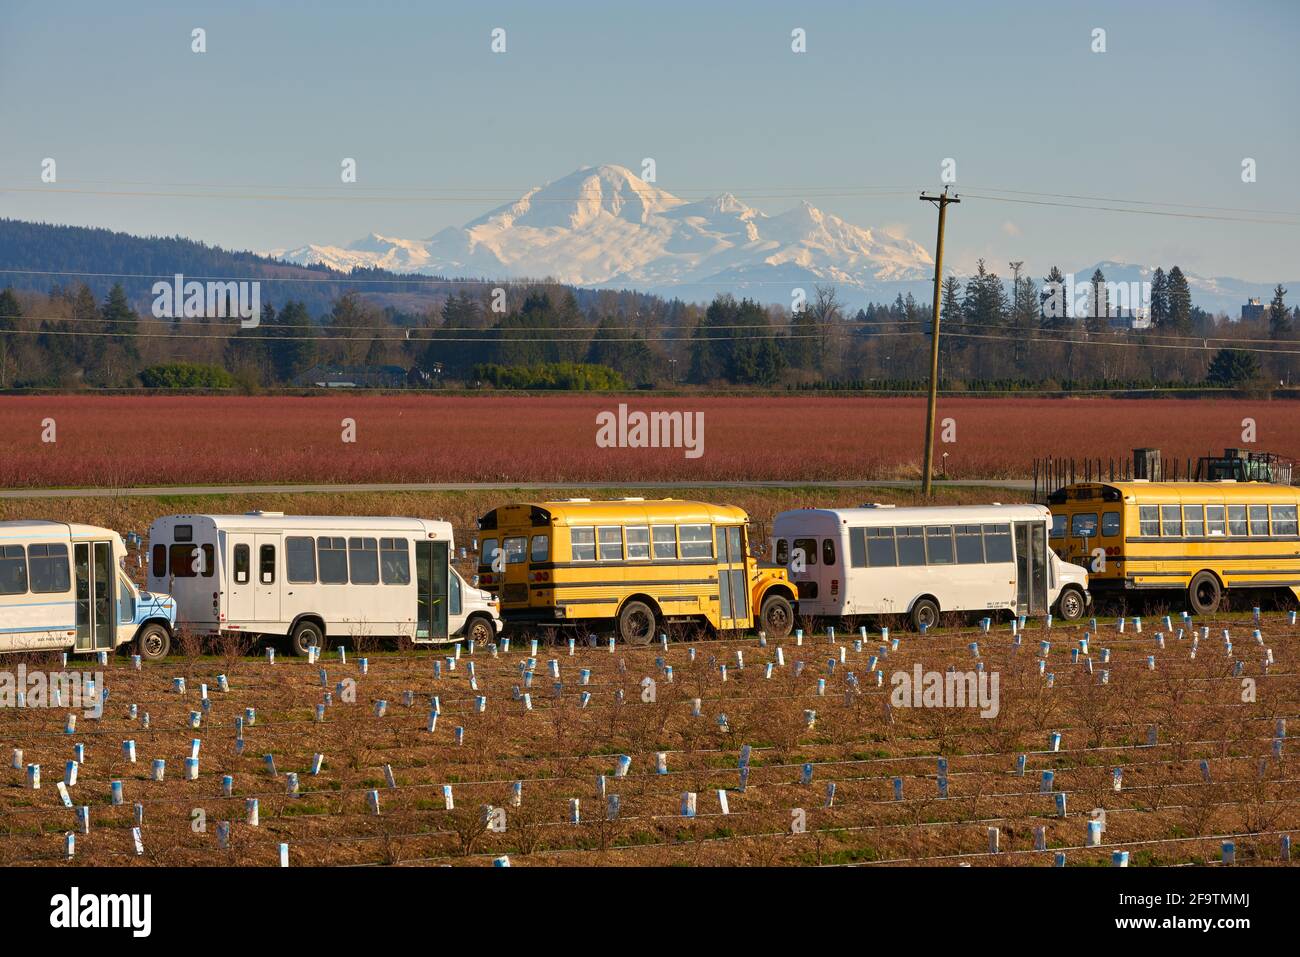 Pitt Meadows Agriculture. Busses for transporting farm workers parked in a field. Mt Baker rising in the background. Stock Photo